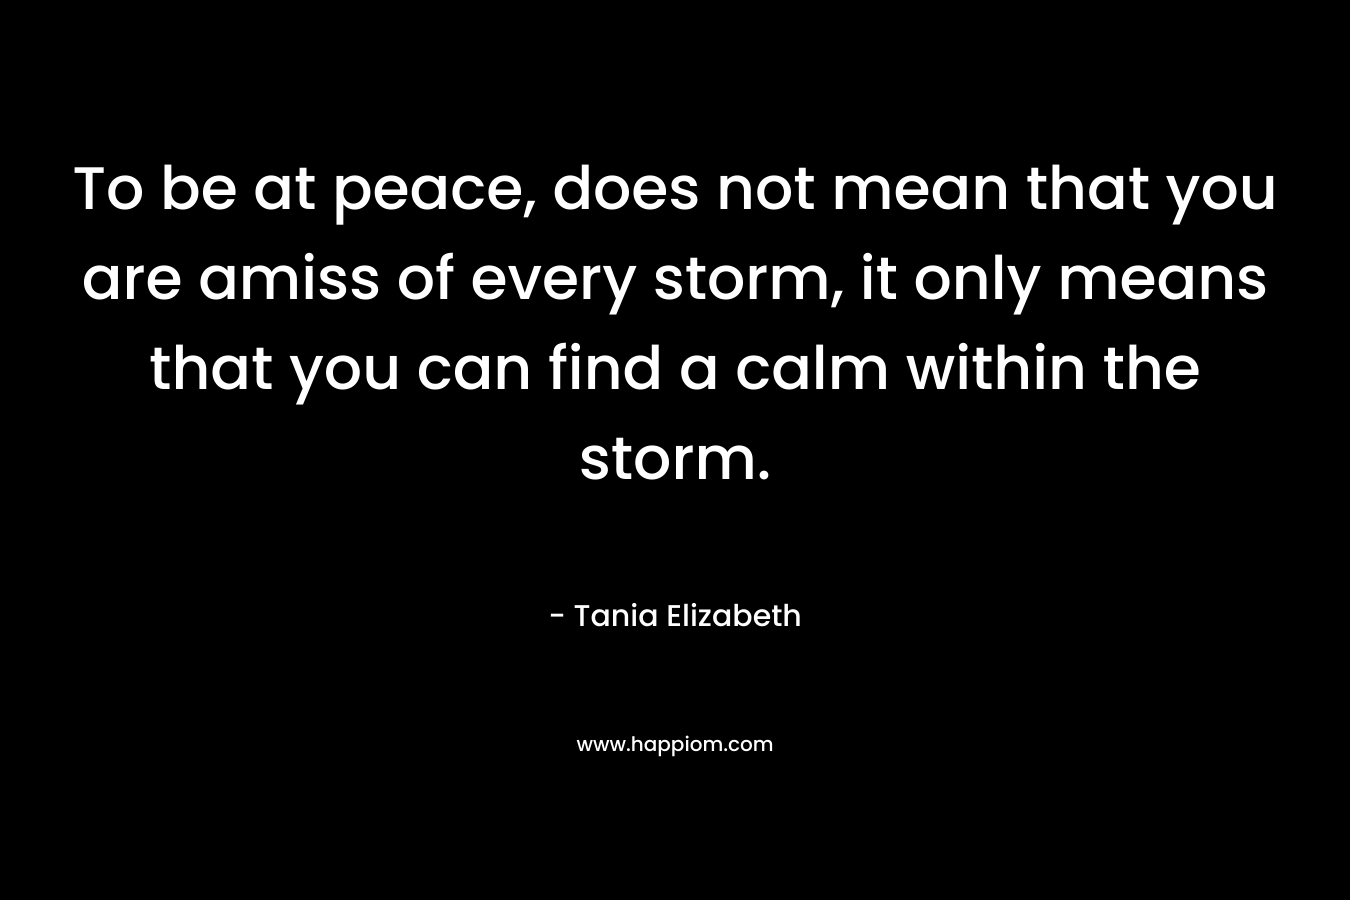 To be at peace, does not mean that you are amiss of every storm, it only means that you can find a calm within the storm.